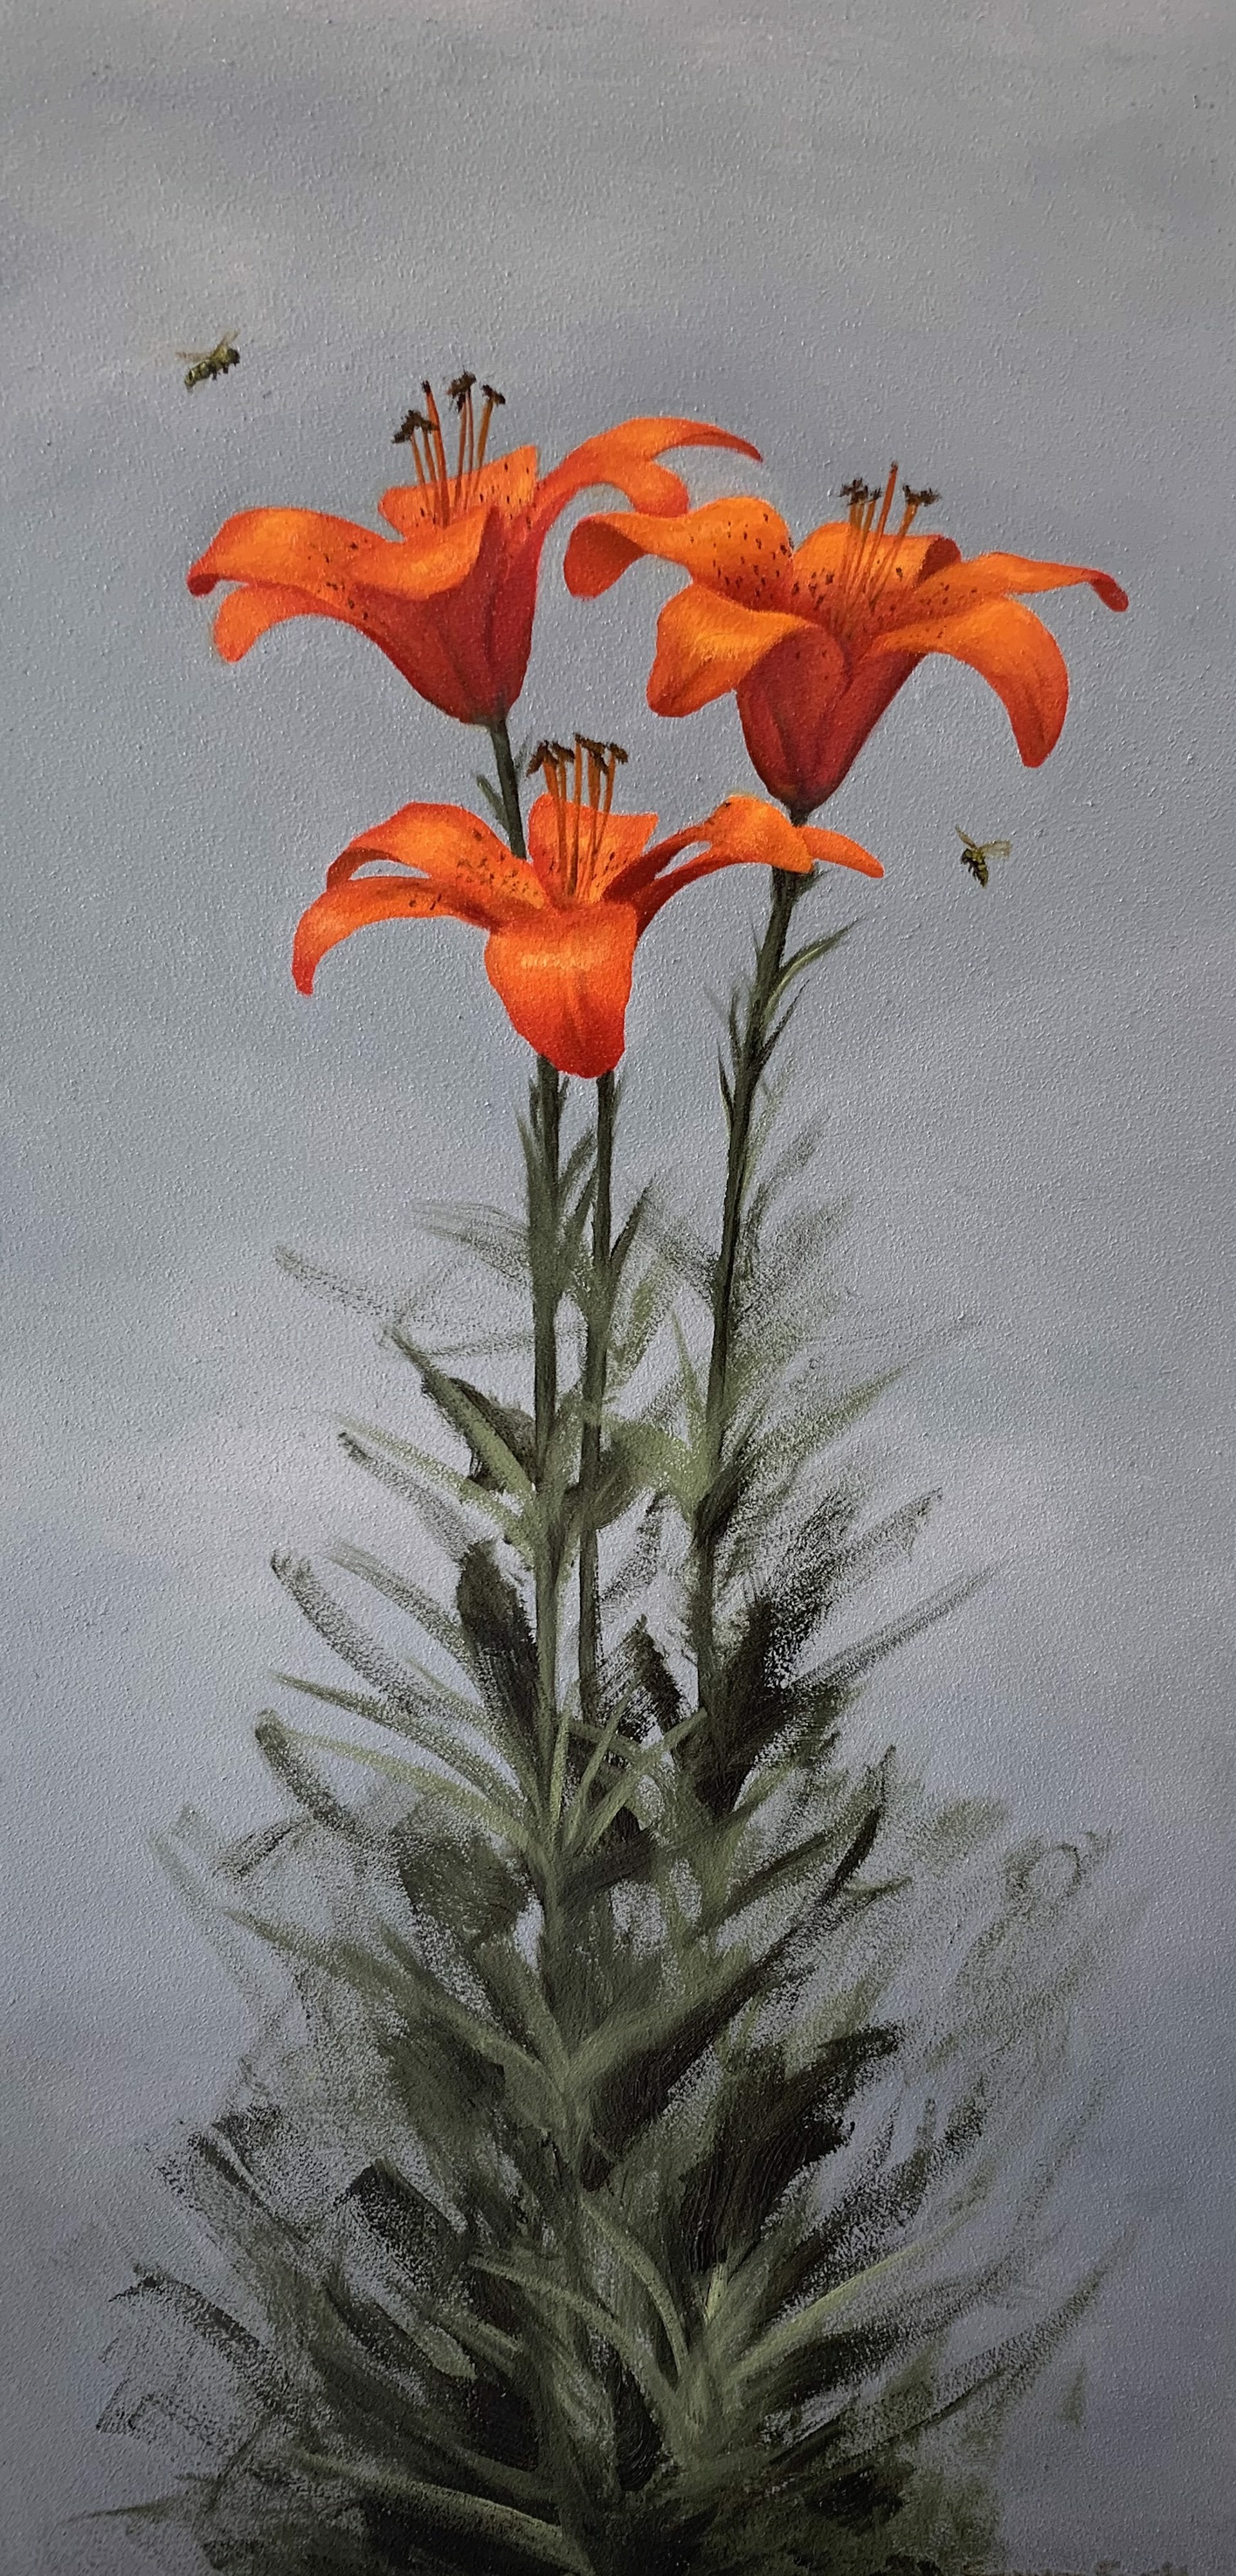 Tiger Lillies by Gregory Smith